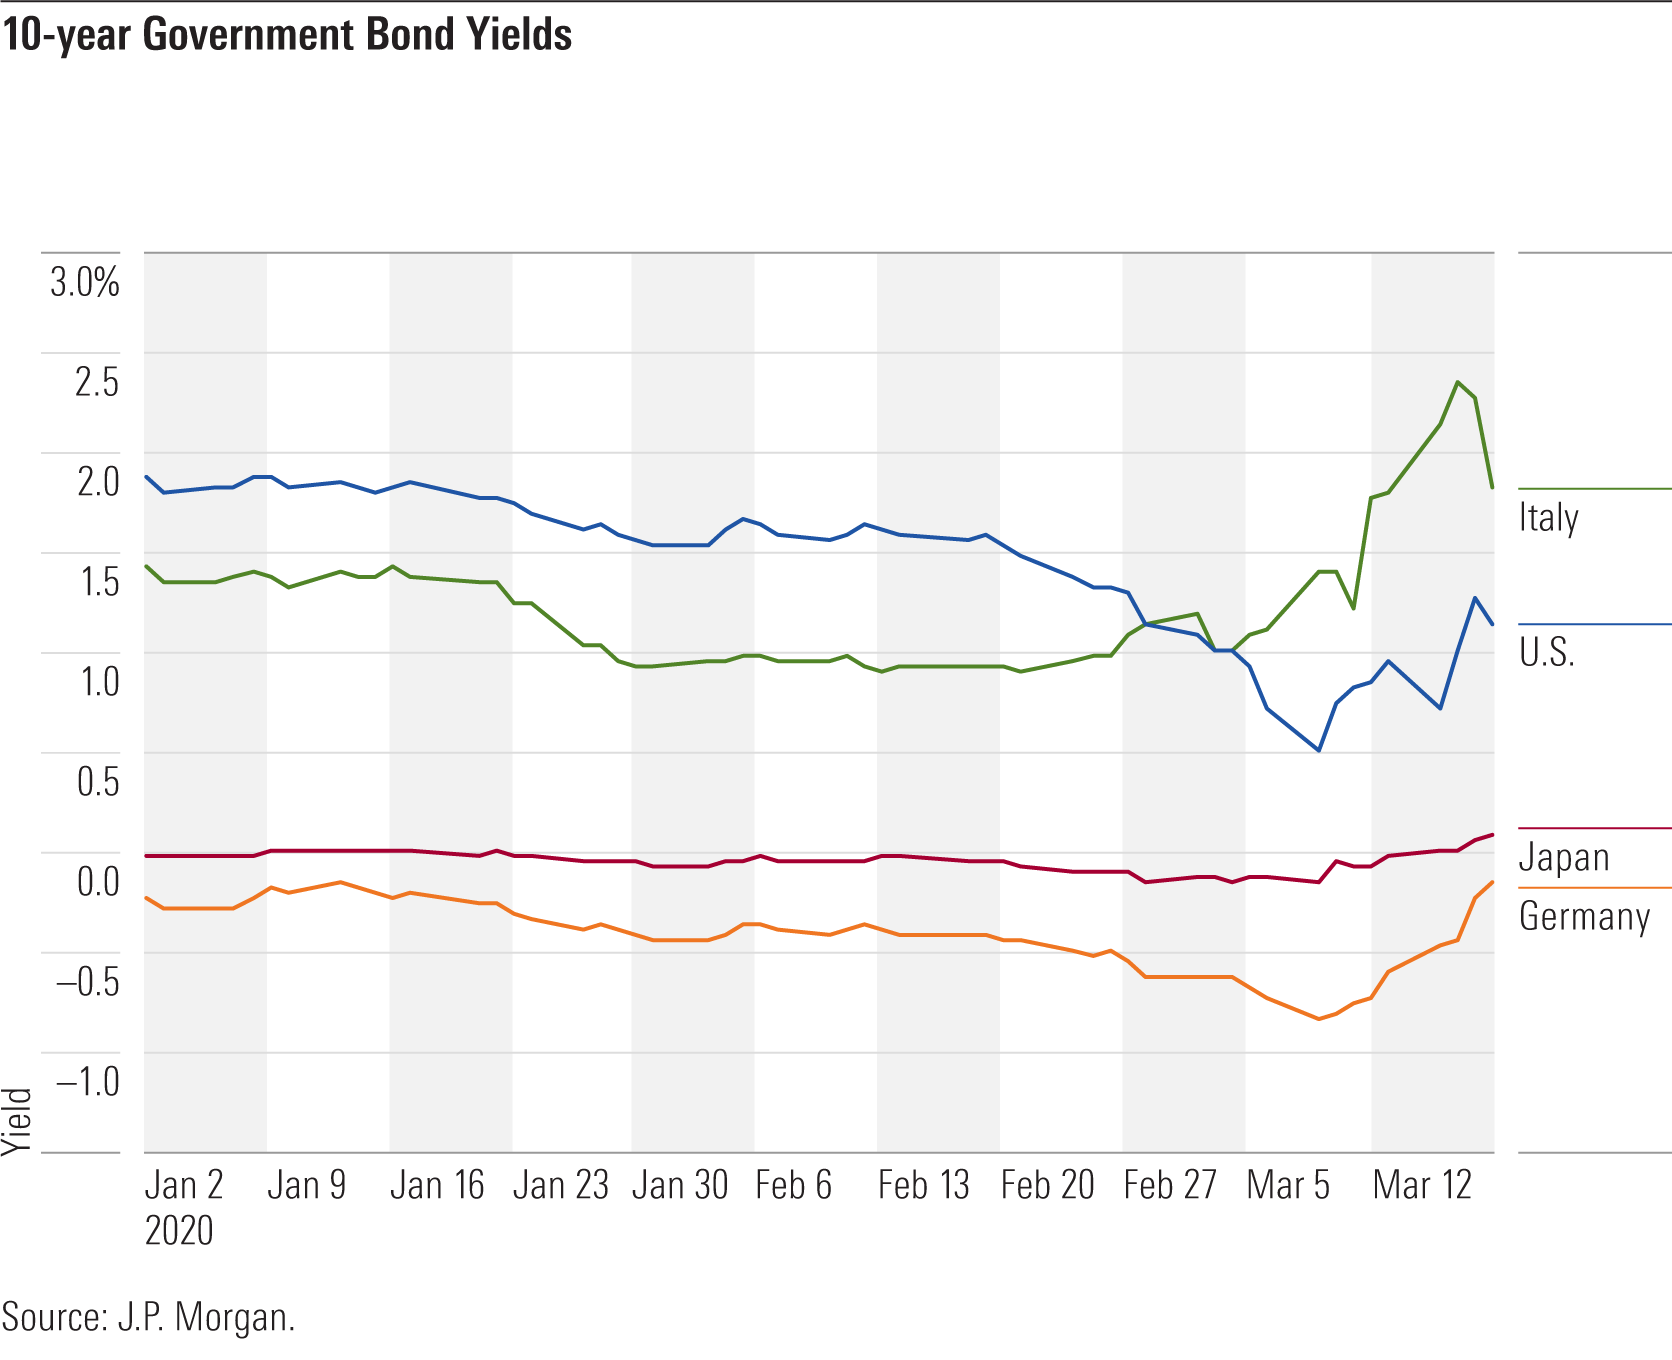 How Are Global and EmergingMarkets Bond Funds Holding Up?